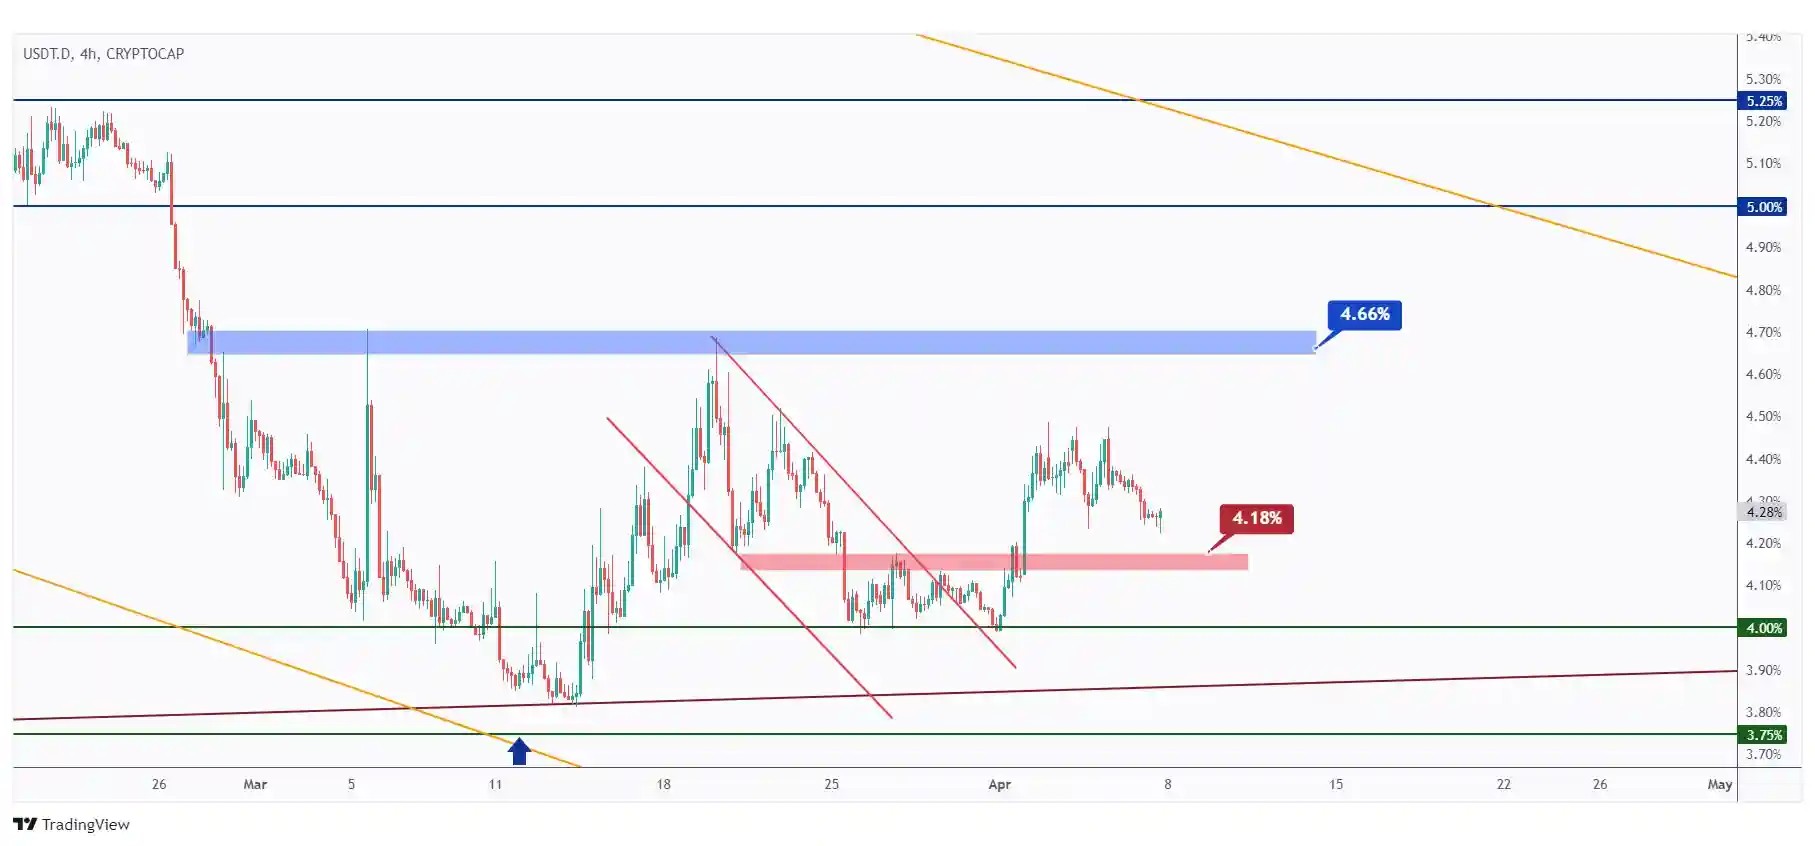 USDT.D 4H hovering within a range short-term between 4.18% and 4.66%.